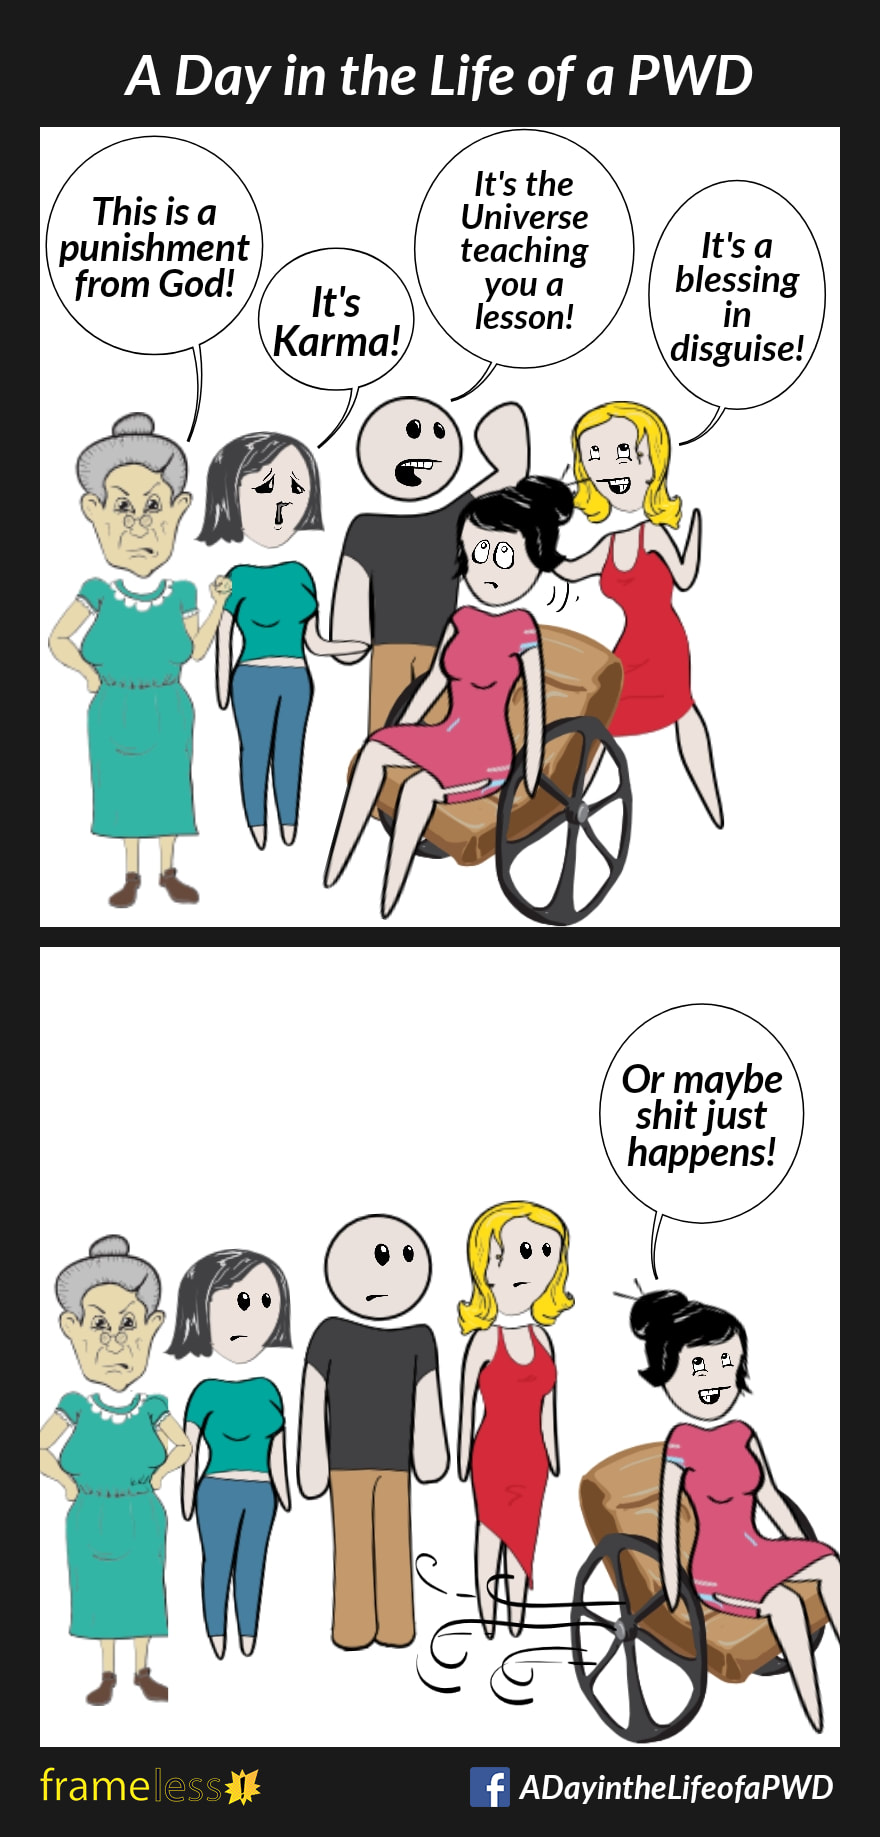 COMIC STRIP 
A Day in the Life of a PWD (Person With a Disability) 

Frame 1:
A woman in a wheelchair is in a group of people. They are sharing their opinions about why she's disabled.
PERSON A: This is a punishment from God!
PERSON B: It's Karma!
PERSON C: It's the Universe teaching you a lesson!
PERSON D: It's a blessing in disguise!

Frame 2:
WOMAN (over her shoulder as she rolls away): Or maybe shit just happens!